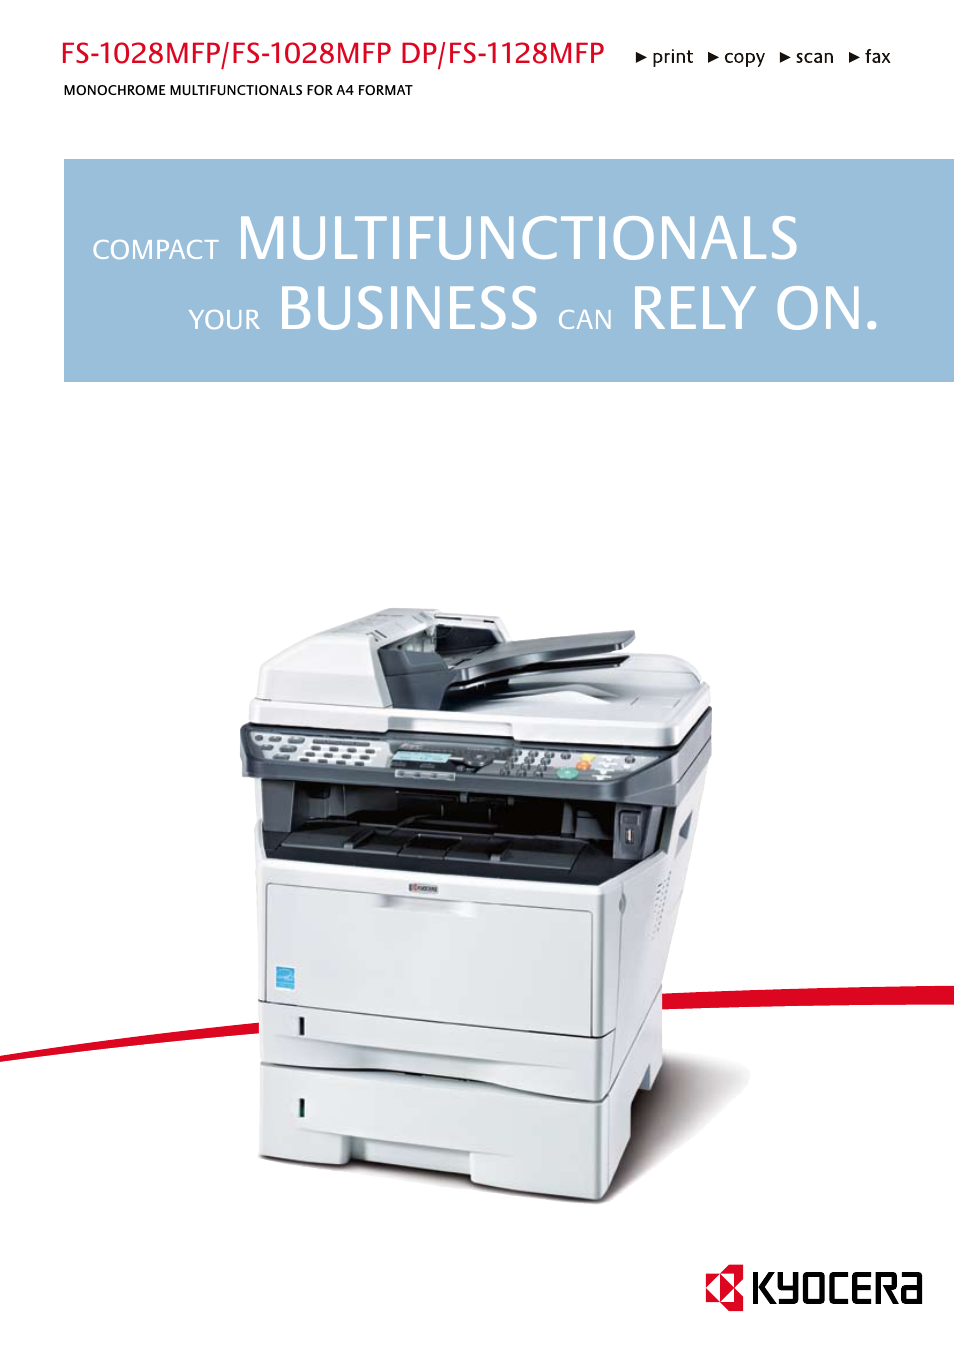 MONOCHROME MULTIFUNCTIONALS FOR A4 FORMAT FS-1028MFP